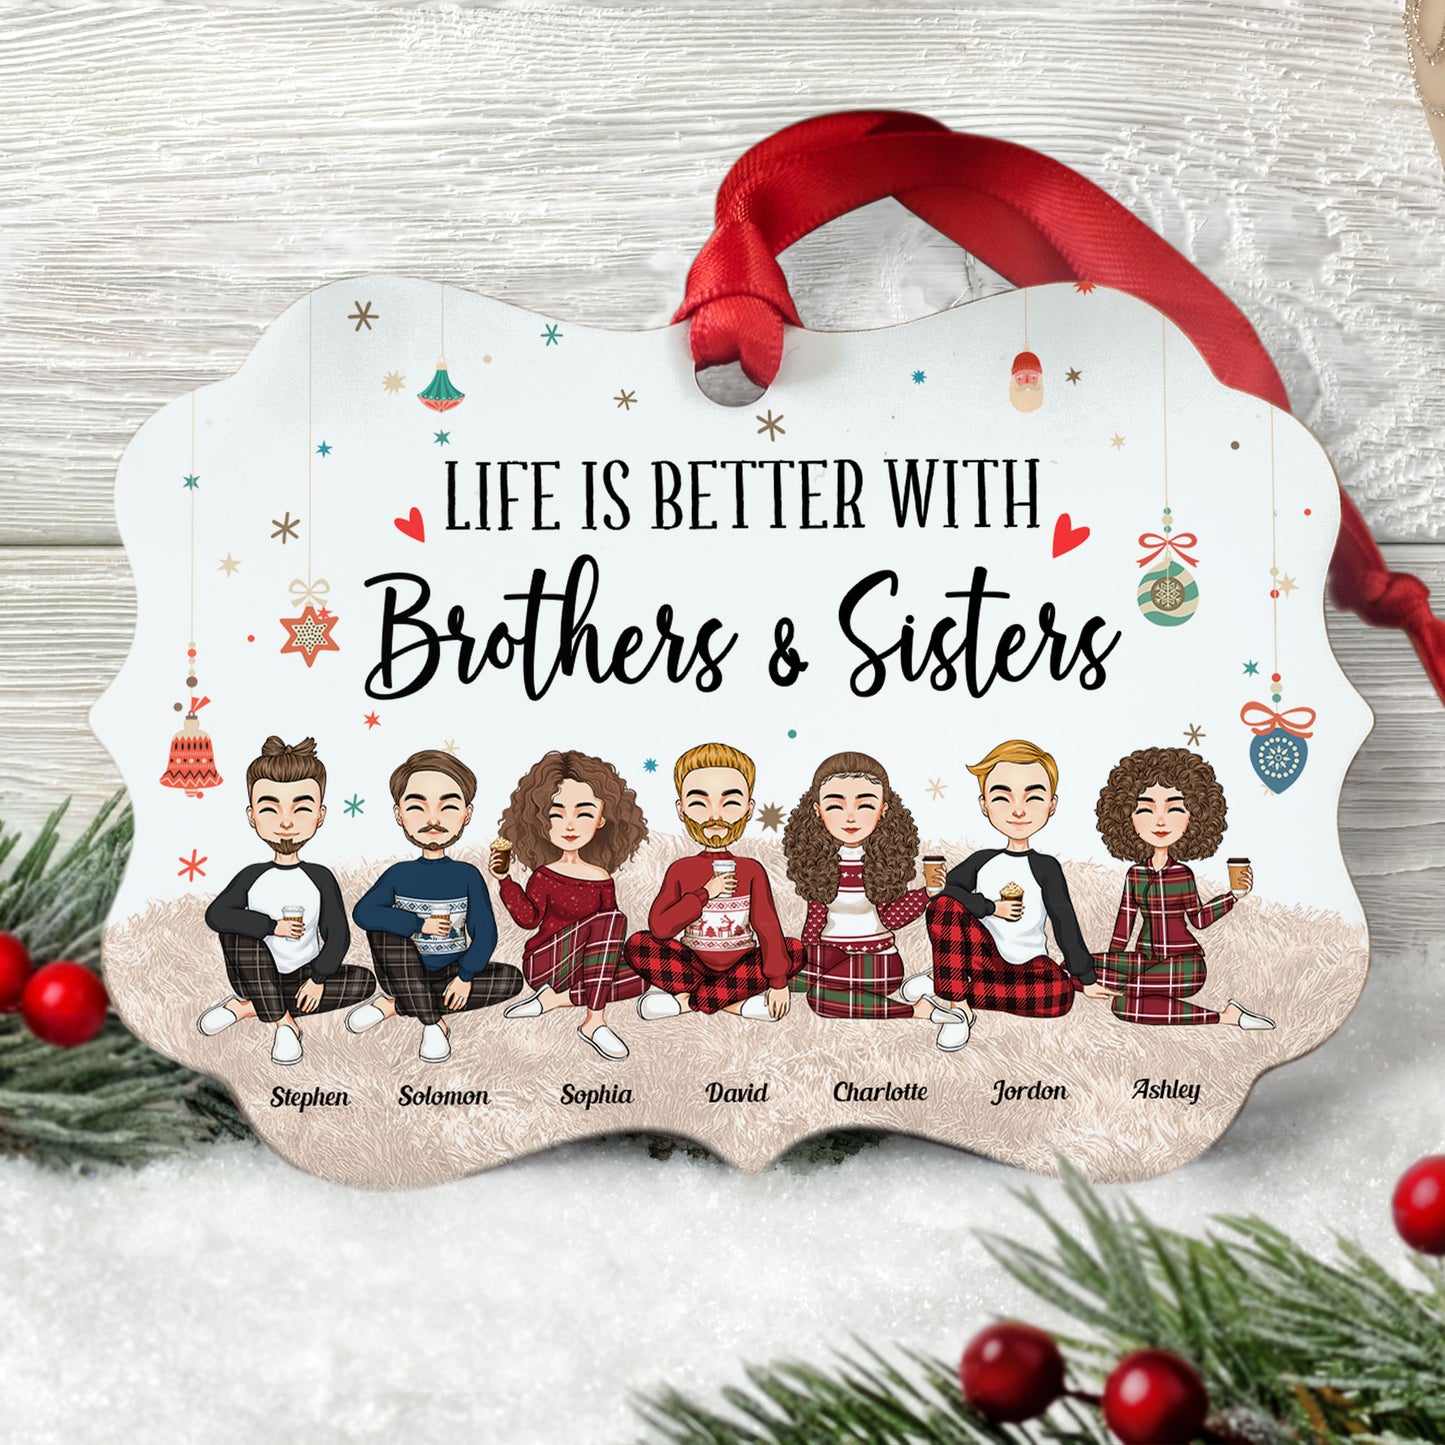 Life Is Better With Brothers And Sisters - Personalized Aluminum Ornament - Christmas, New Year Gift For Family, Sisters, Brothers, Siblings